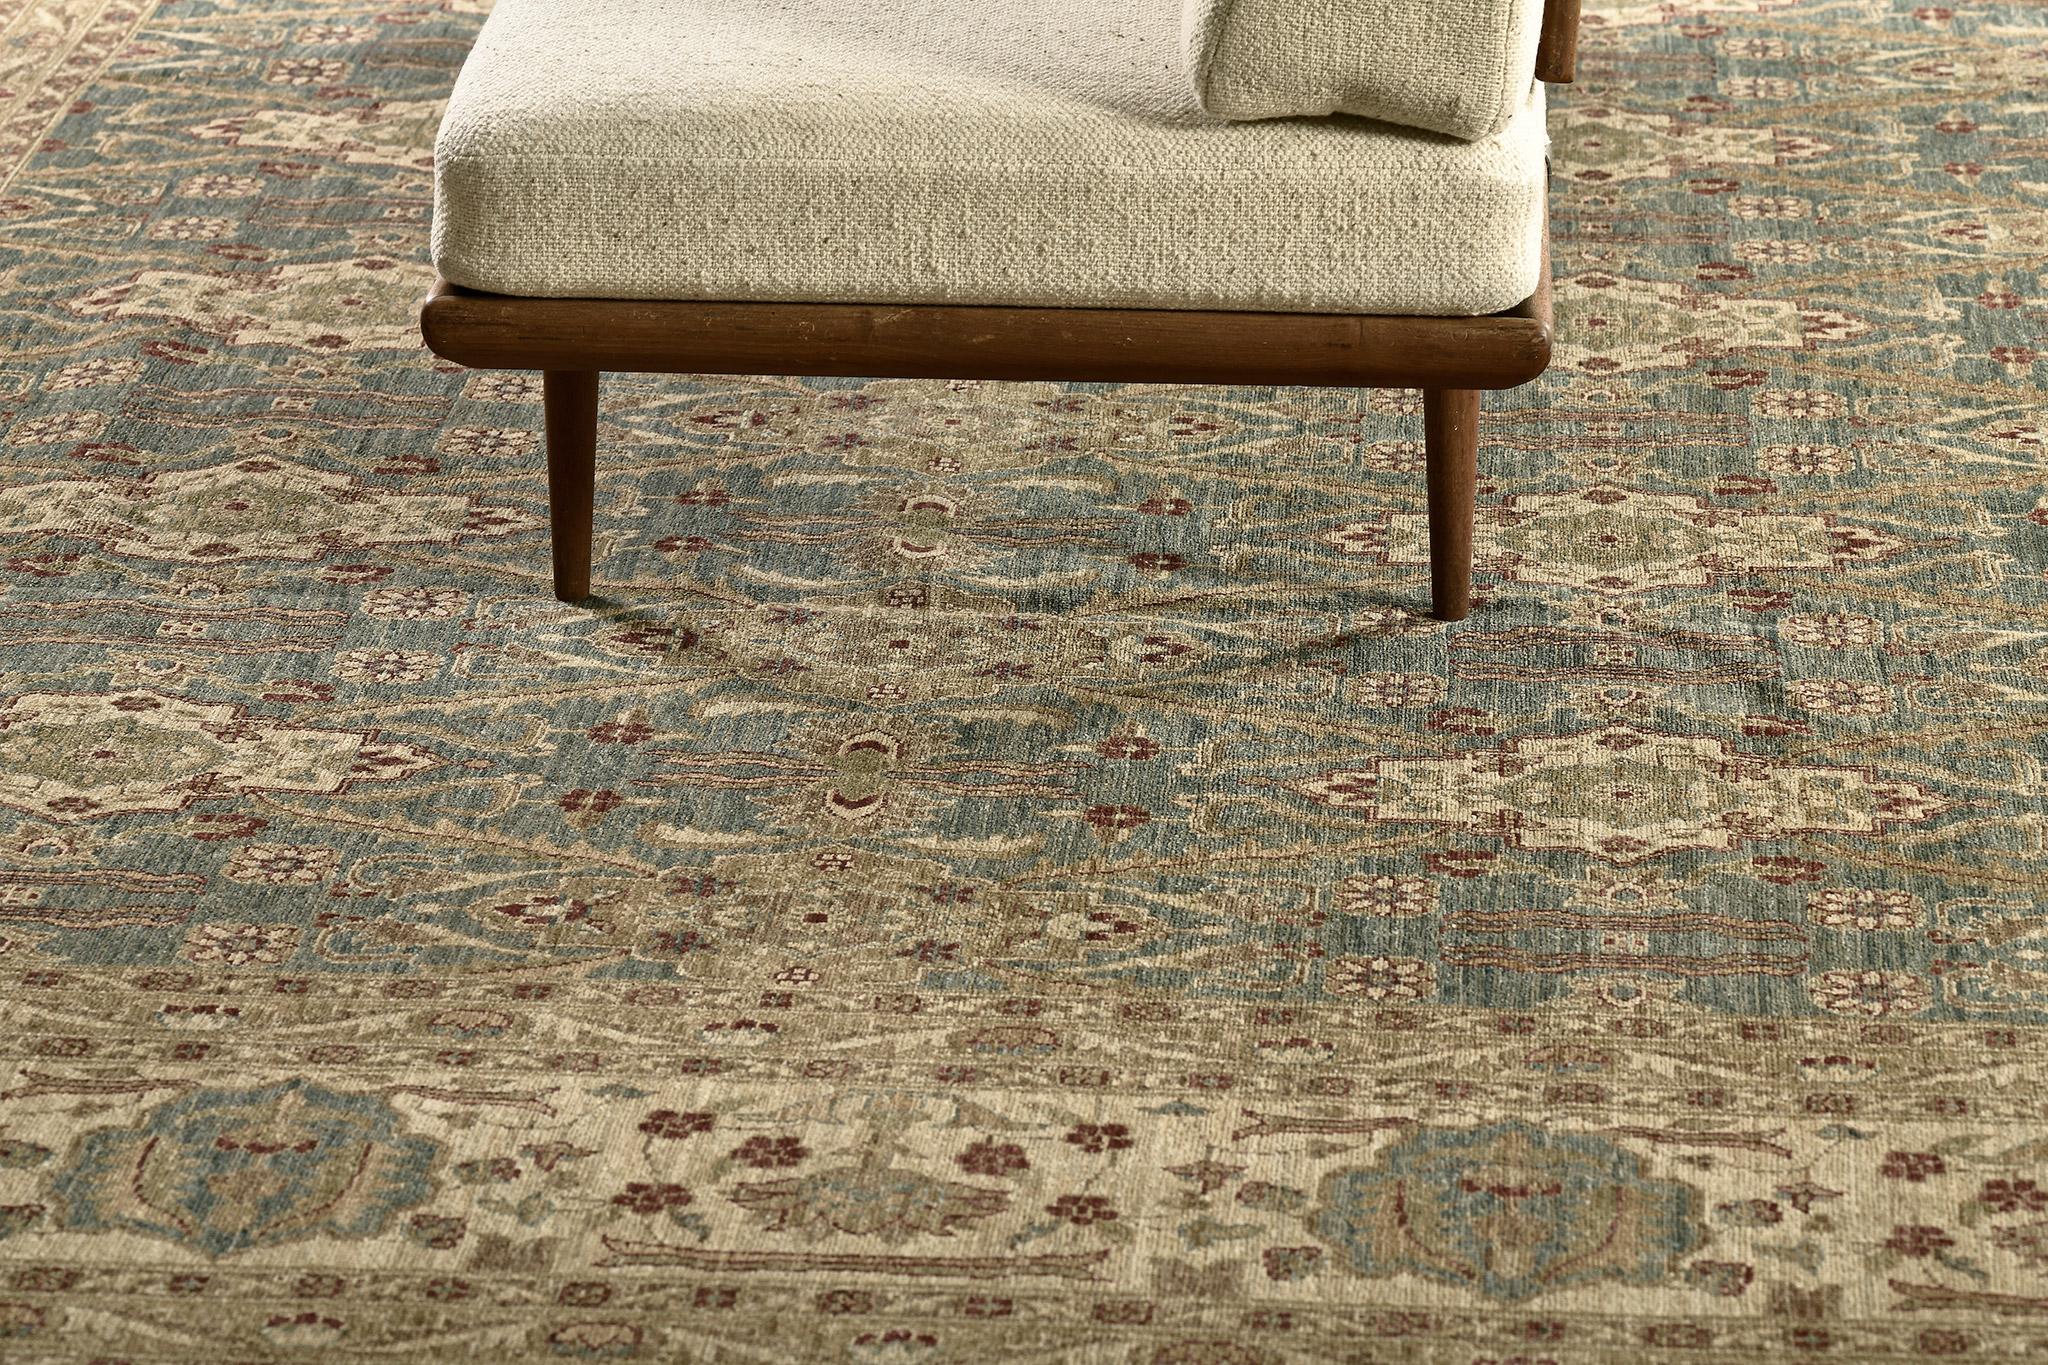 Get captivated by this Agra Rug that features an earthy-toned design that complements the motifs. Series of symmetrically leafy scrolls and tendrils, florets, and medallions are featured. Perfect for your traditional home interior that matches your